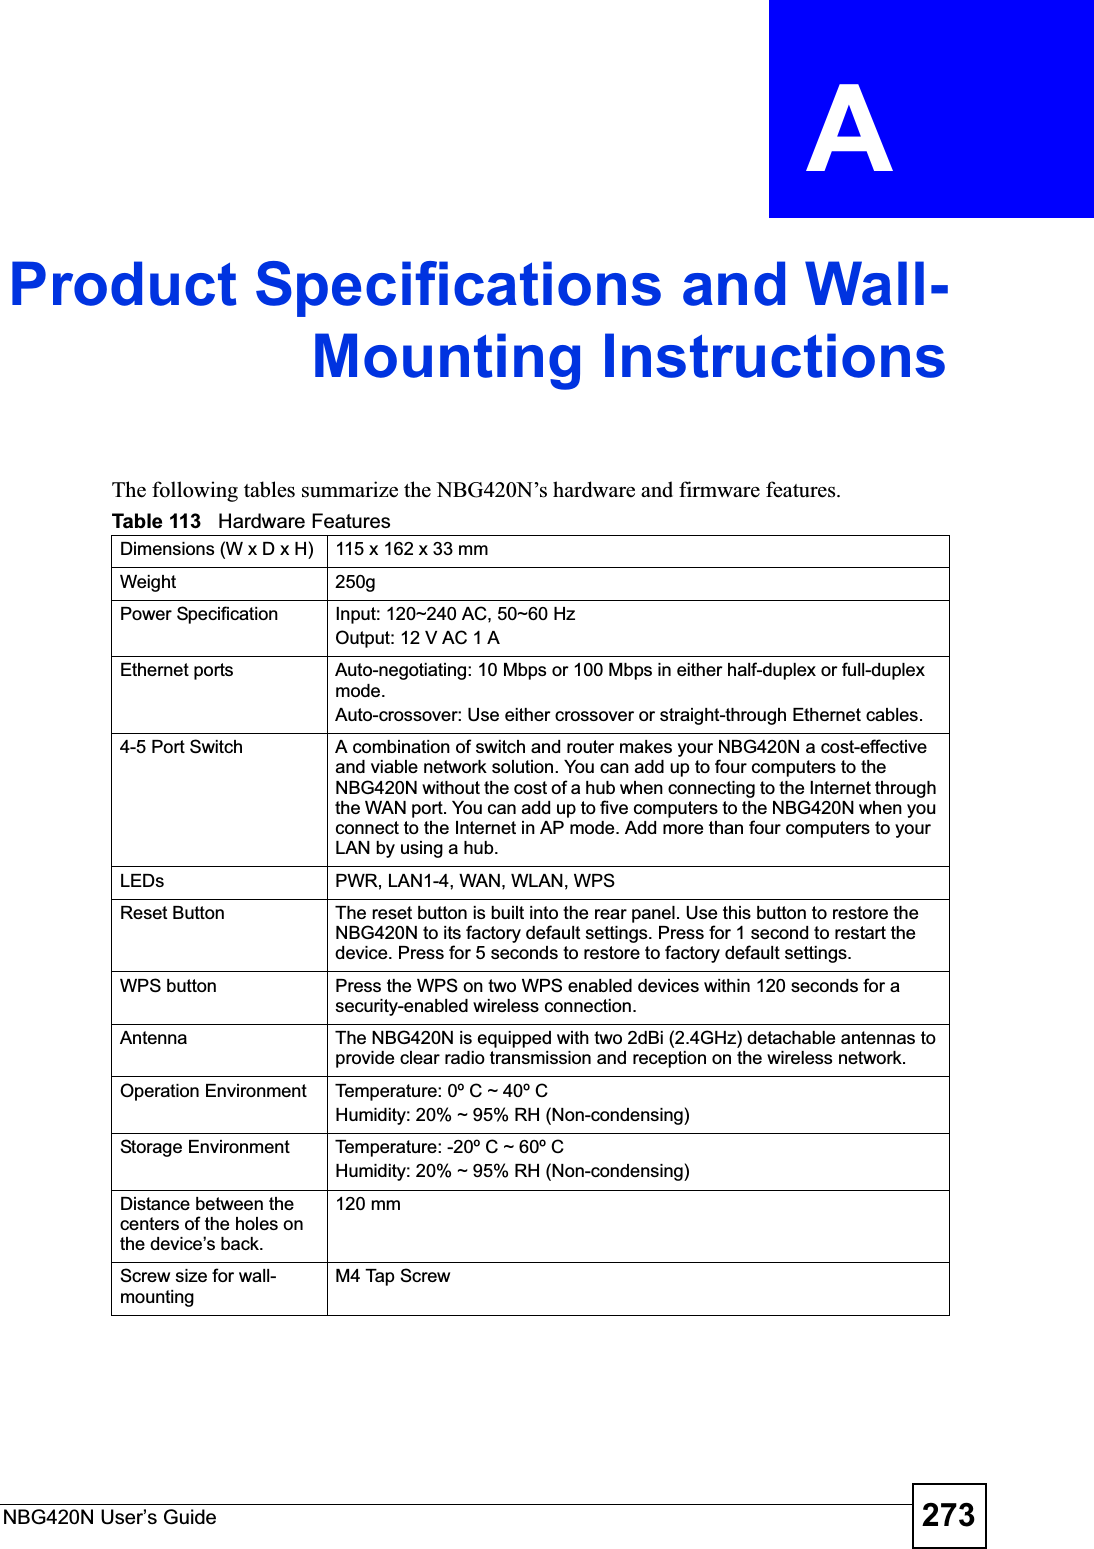 NBG420N User’s Guide 273APPENDIX  A Product Specifications and Wall-Mounting InstructionsThe following tables summarize the NBG420N’s hardware and firmware features.Table 113   Hardware FeaturesDimensions (W x D x H)  115 x 162 x 33 mmWeight 250gPower Specification Input: 120~240 AC, 50~60 HzOutput: 12 V AC 1 AEthernet ports Auto-negotiating: 10 Mbps or 100 Mbps in either half-duplex or full-duplex mode.Auto-crossover: Use either crossover or straight-through Ethernet cables.4-5 Port Switch A combination of switch and router makes your NBG420N a cost-effective and viable network solution. You can add up to four computers to the NBG420N without the cost of a hub when connecting to the Internet through the WAN port. You can add up to five computers to the NBG420N when you connect to the Internet in AP mode. Add more than four computers to your LAN by using a hub.LEDs PWR, LAN1-4, WAN, WLAN, WPSReset Button The reset button is built into the rear panel. Use this button to restore the NBG420N to its factory default settings. Press for 1 second to restart the device. Press for 5 seconds to restore to factory default settings.WPS button Press the WPS on two WPS enabled devices within 120 seconds for a security-enabled wireless connection.Antenna The NBG420N is equipped with two 2dBi (2.4GHz) detachable antennas to provide clear radio transmission and reception on the wireless network. Operation Environment Temperature: 0º C ~ 40º CHumidity: 20% ~ 95% RH (Non-condensing)Storage Environment Temperature: -20º C ~ 60º CHumidity: 20% ~ 95% RH (Non-condensing)Distance between the centers of the holes on the device’s back.120 mmScrew size for wall-mountingM4 Tap Screw